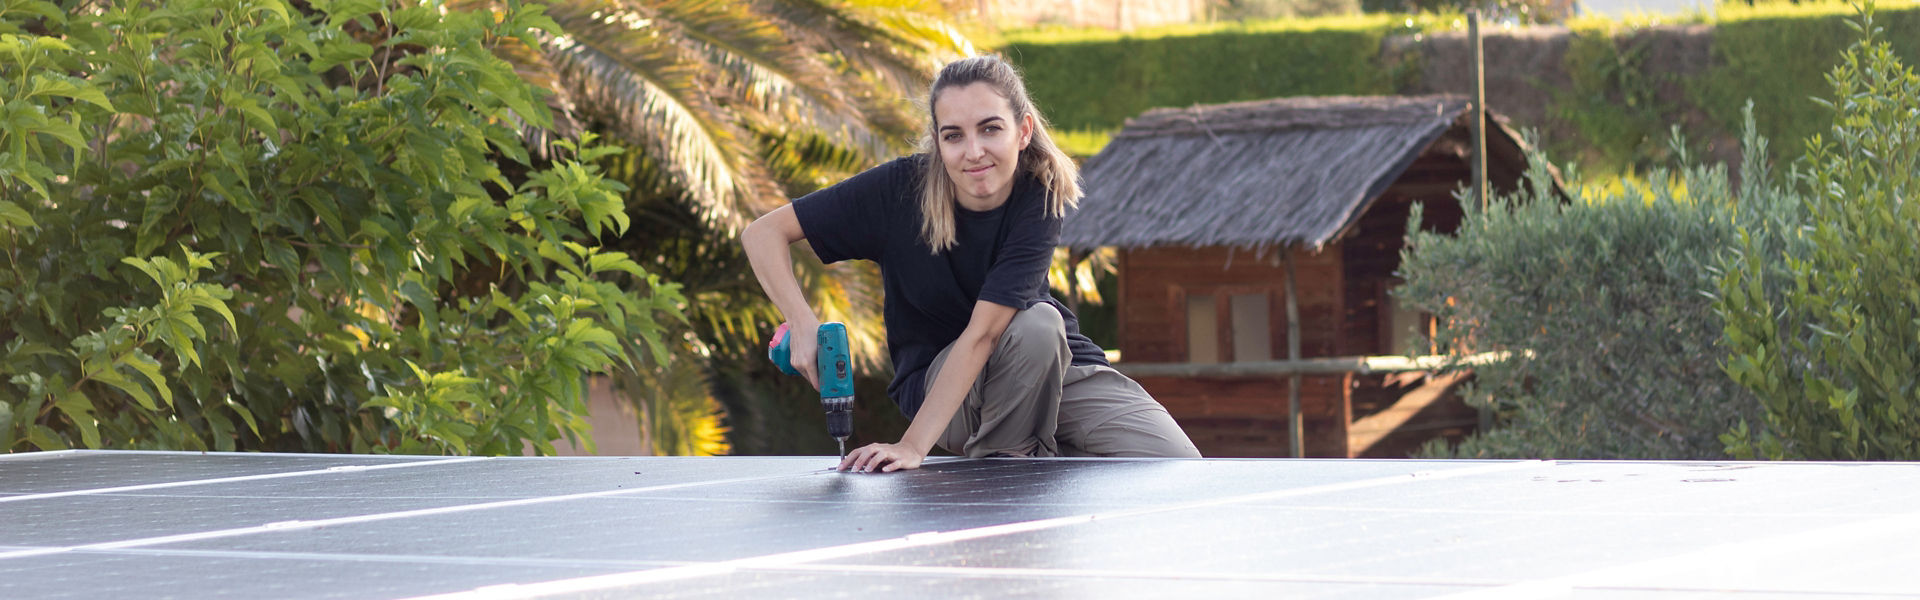 Woman installing solar panels on roof holding drill and smiling at camera on a nice sunny day